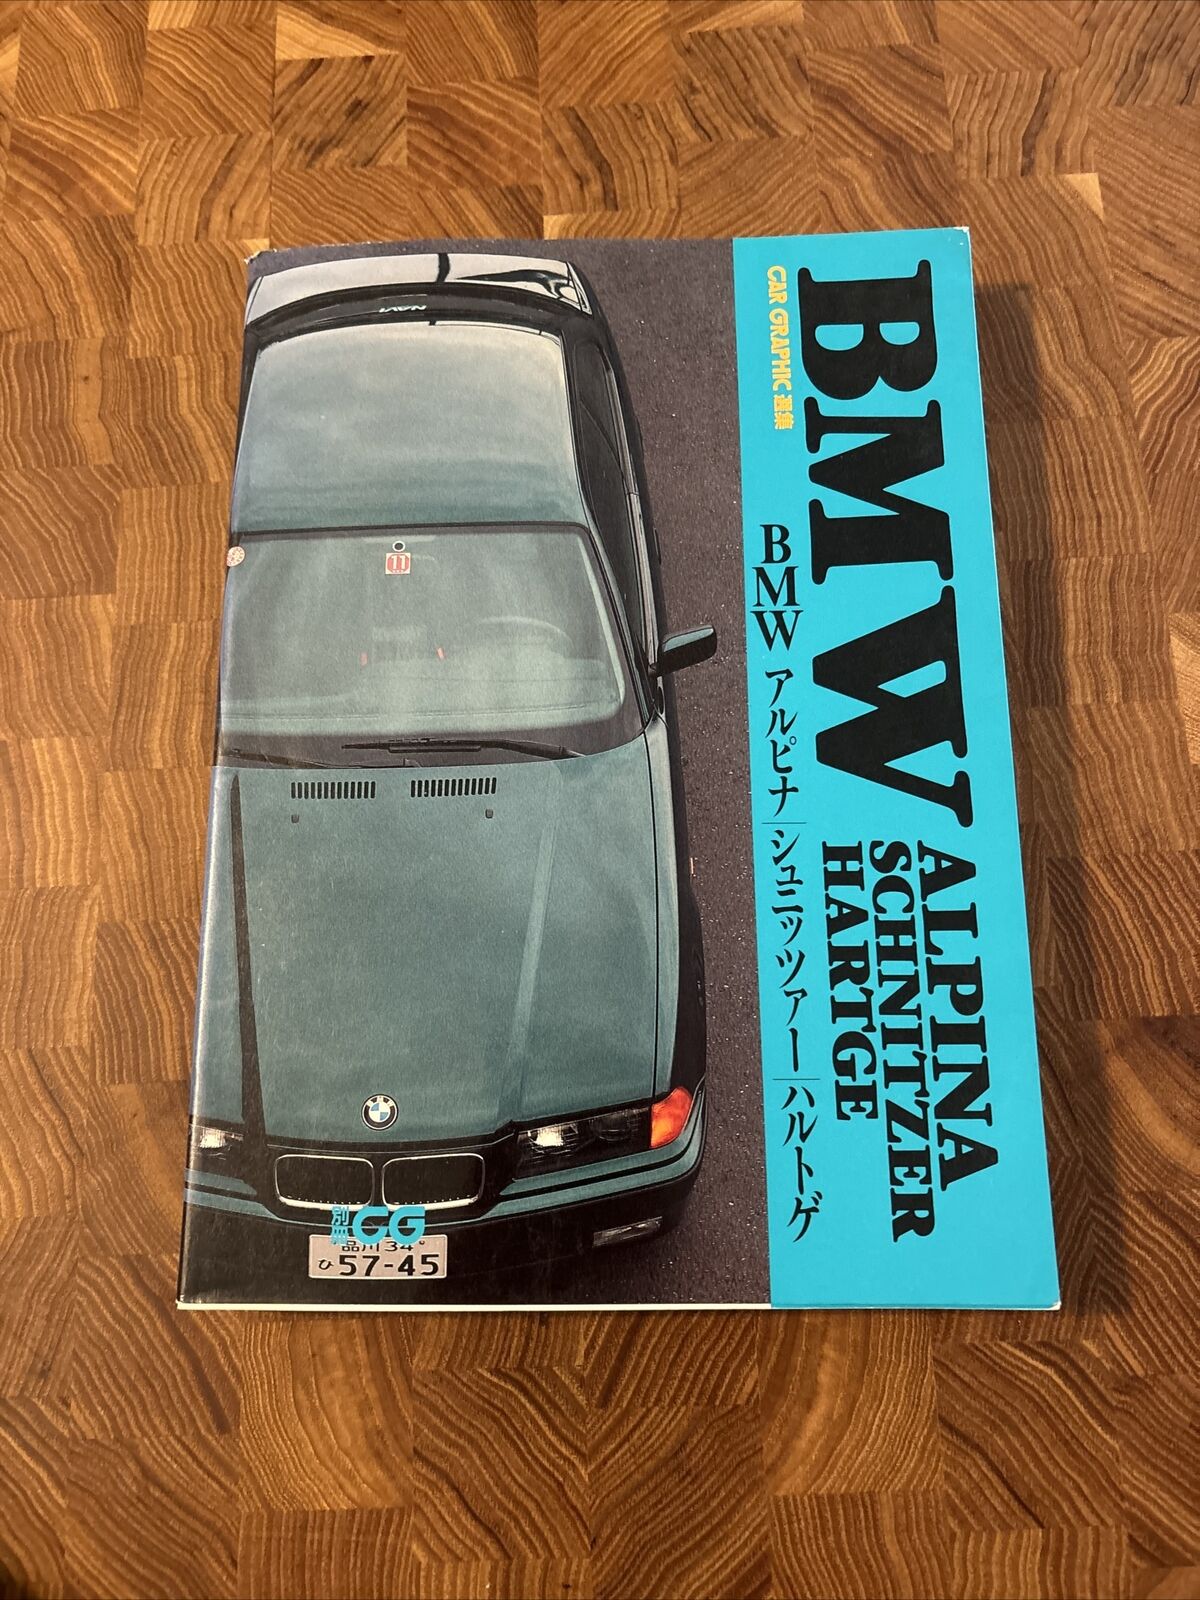 Japanese Guide Book    1994 BMW Alpina Schnitzer Hartge Tuning dress-up guide